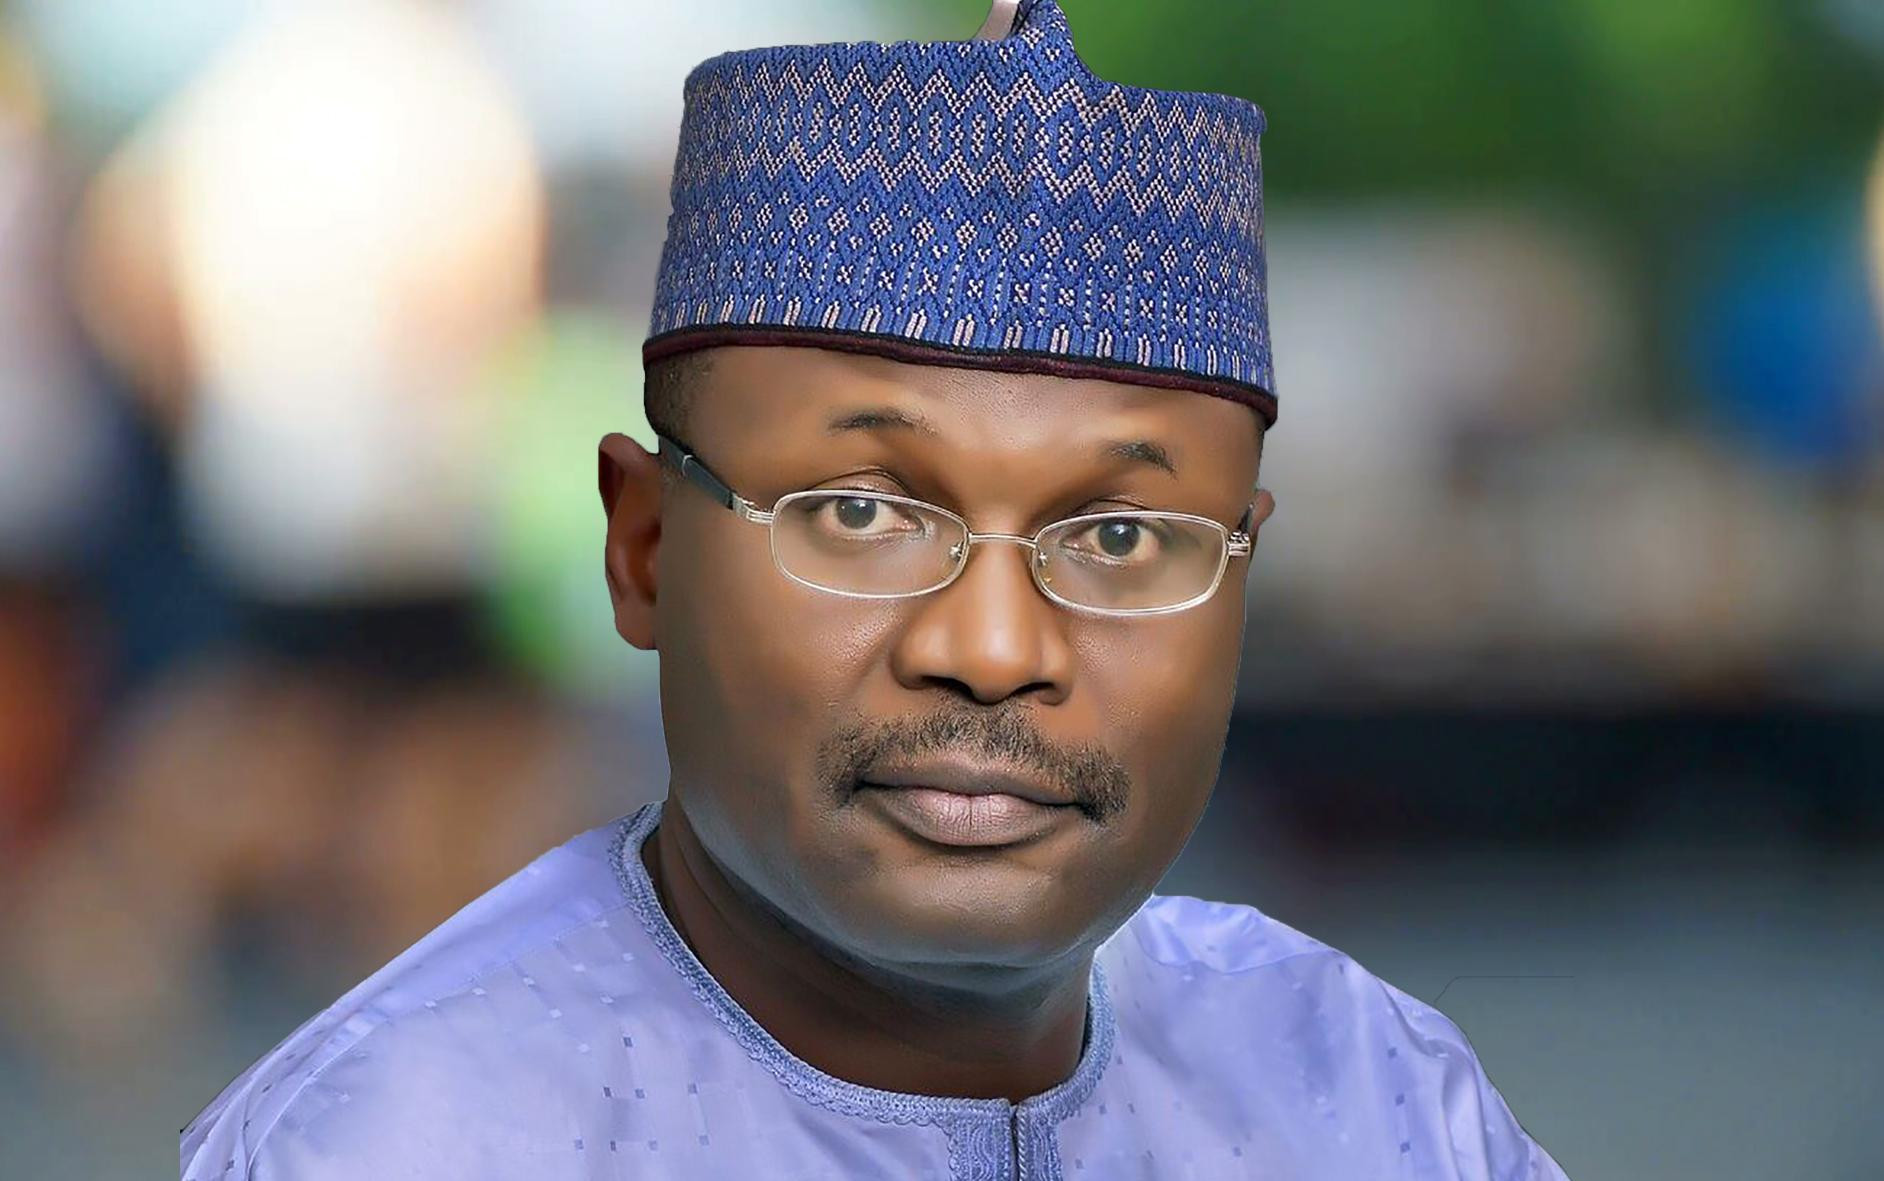 INEC identifies 23 officials involved in fake voter registration